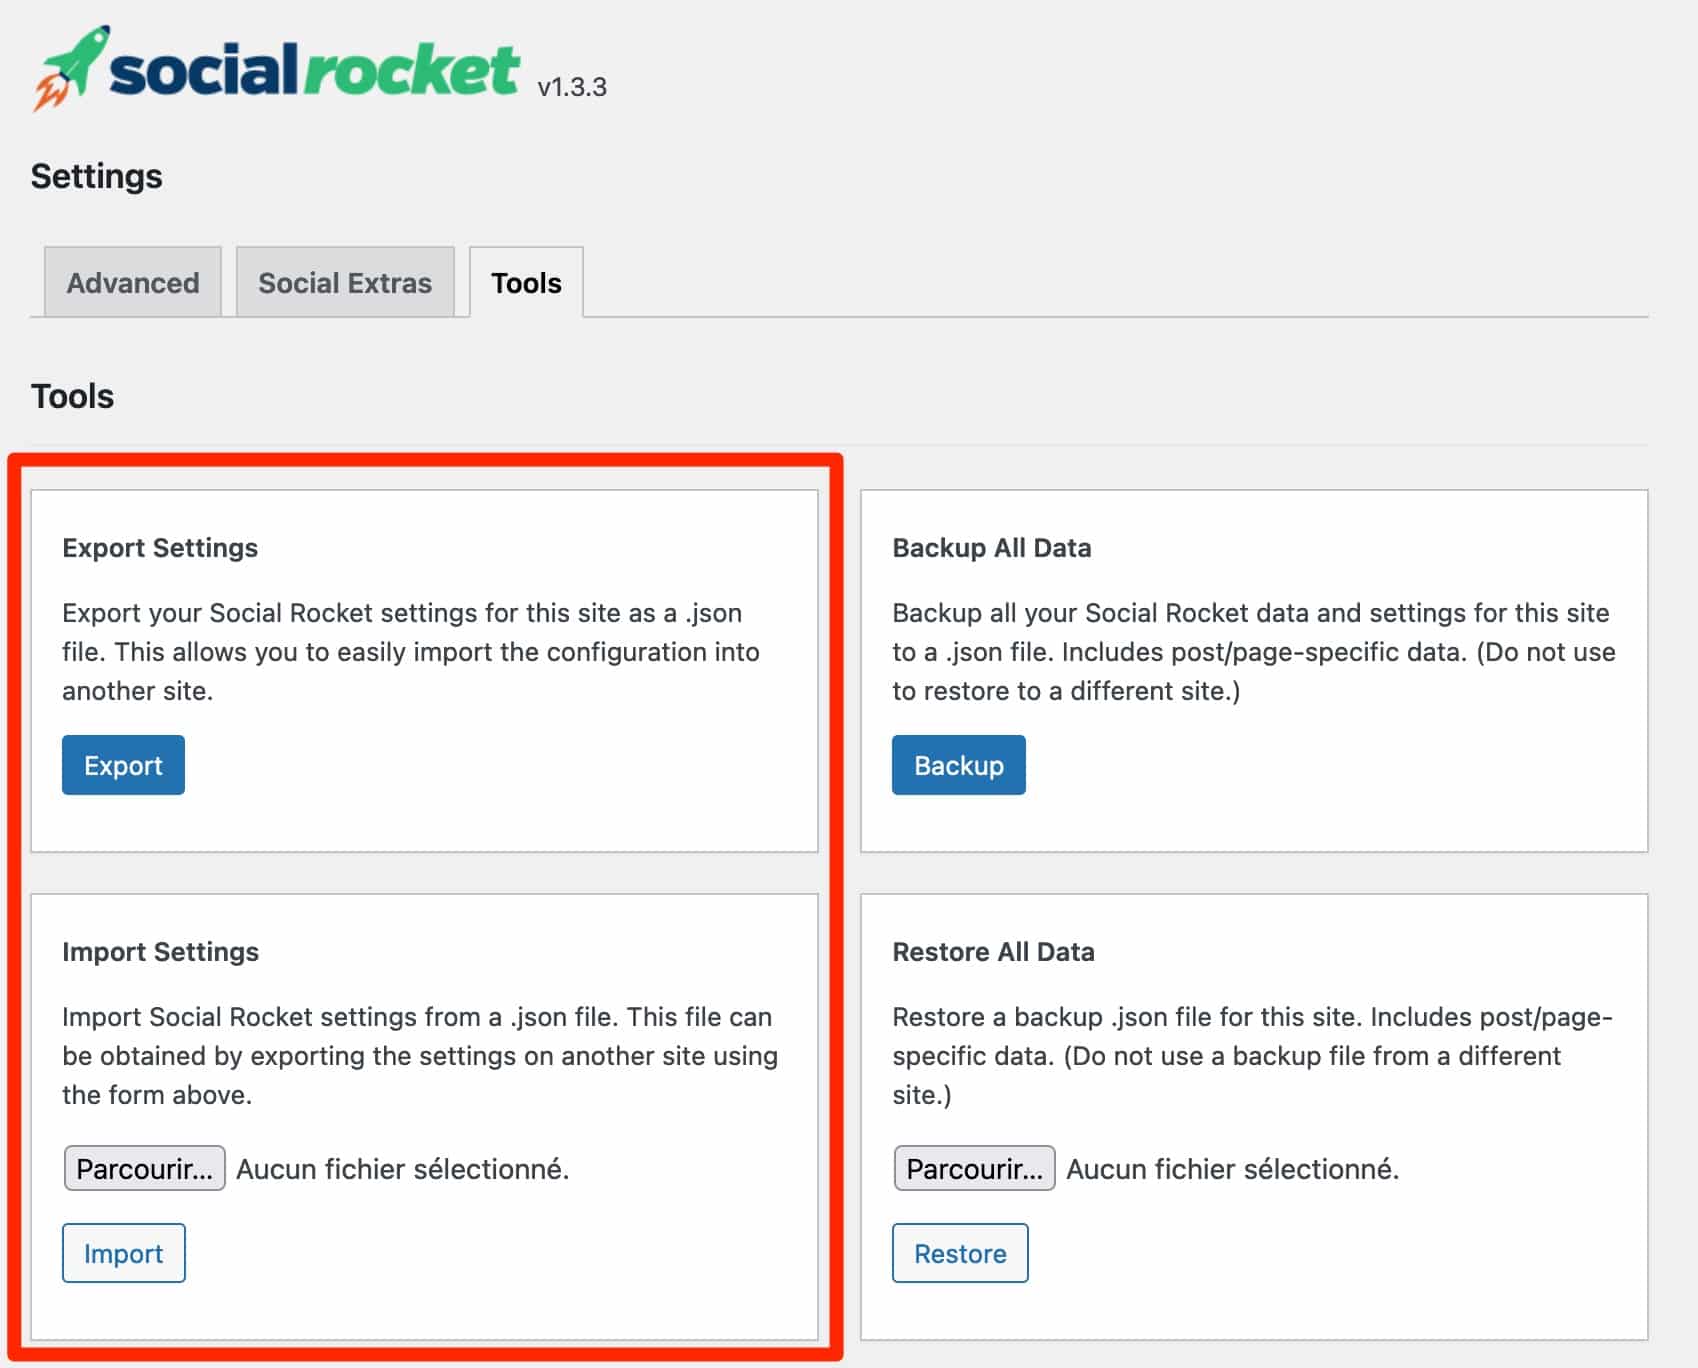 Social Rocket allows you to import or export your settings.